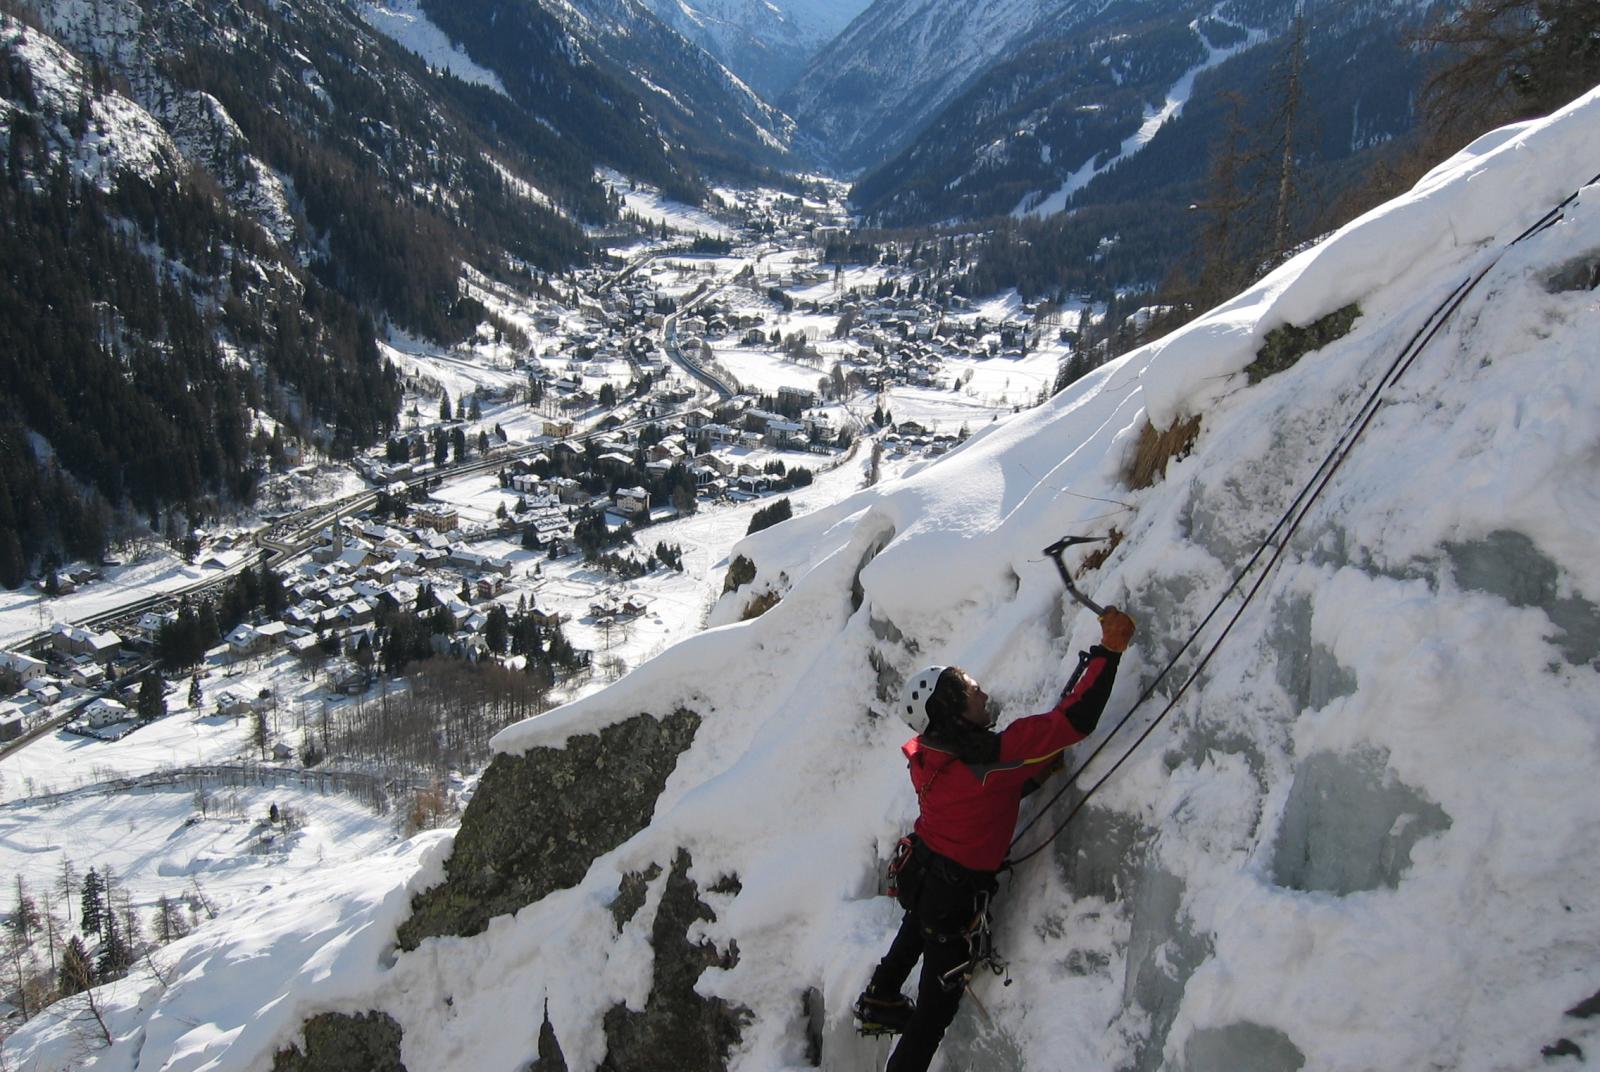 ICE-CLIMBING WITH THE GRESSONEY GUIDE COMPANY